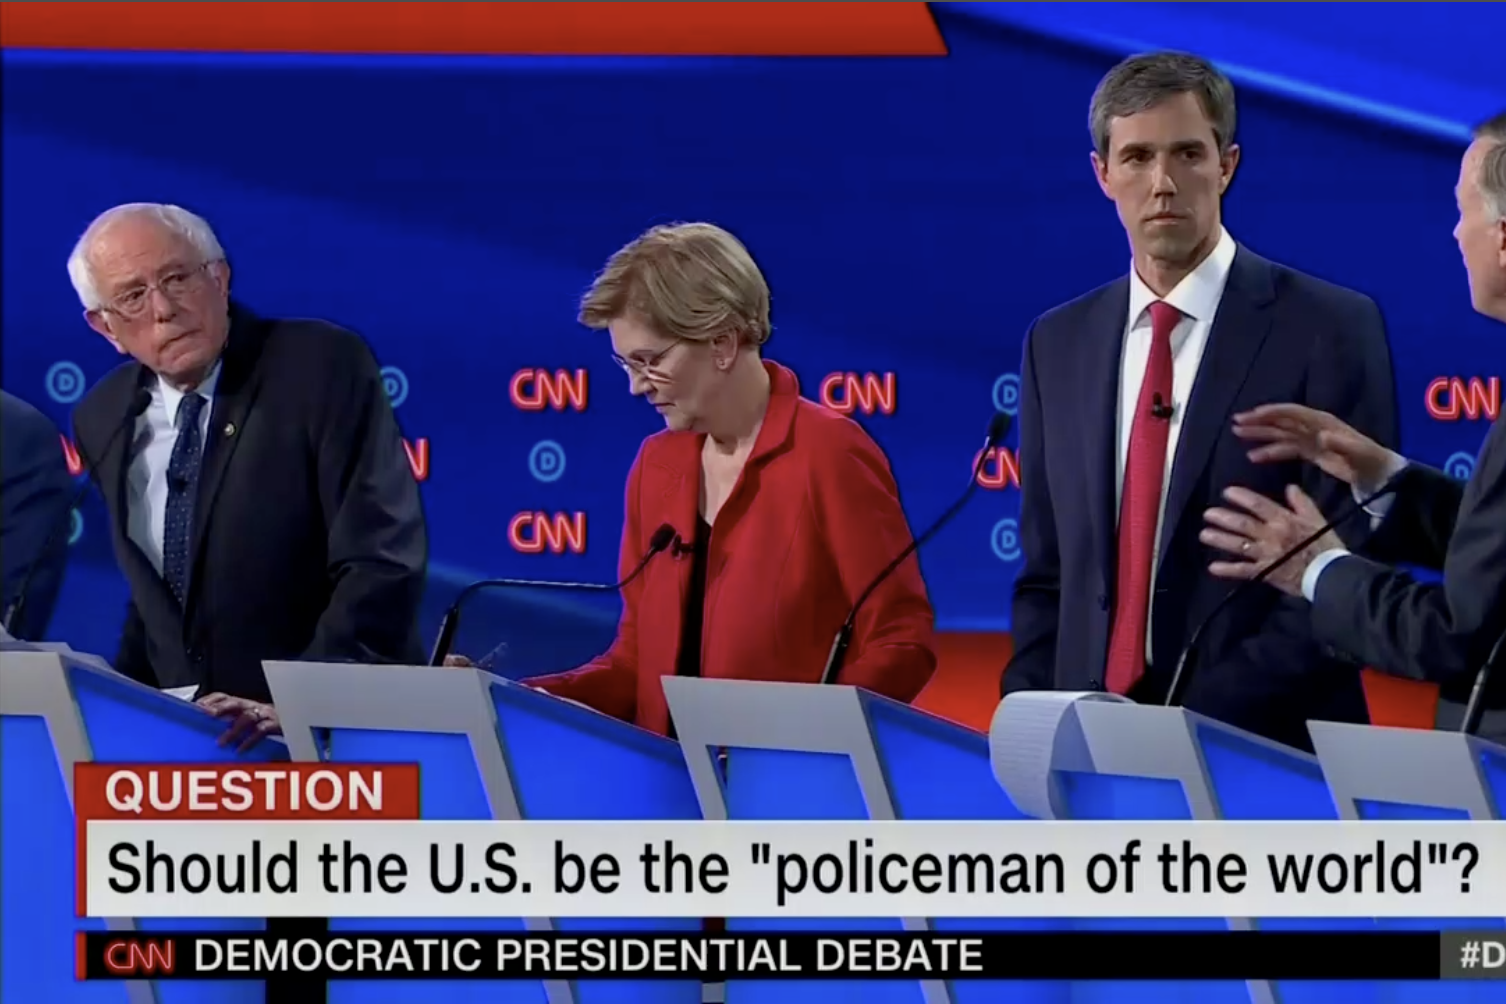 Bernie Sanders, Elizabeth Warren, and Beto O'Rourke are shown in this screengrab from CNN. The banner reads: "Should the U.S. be the 'policeman of the world'?"